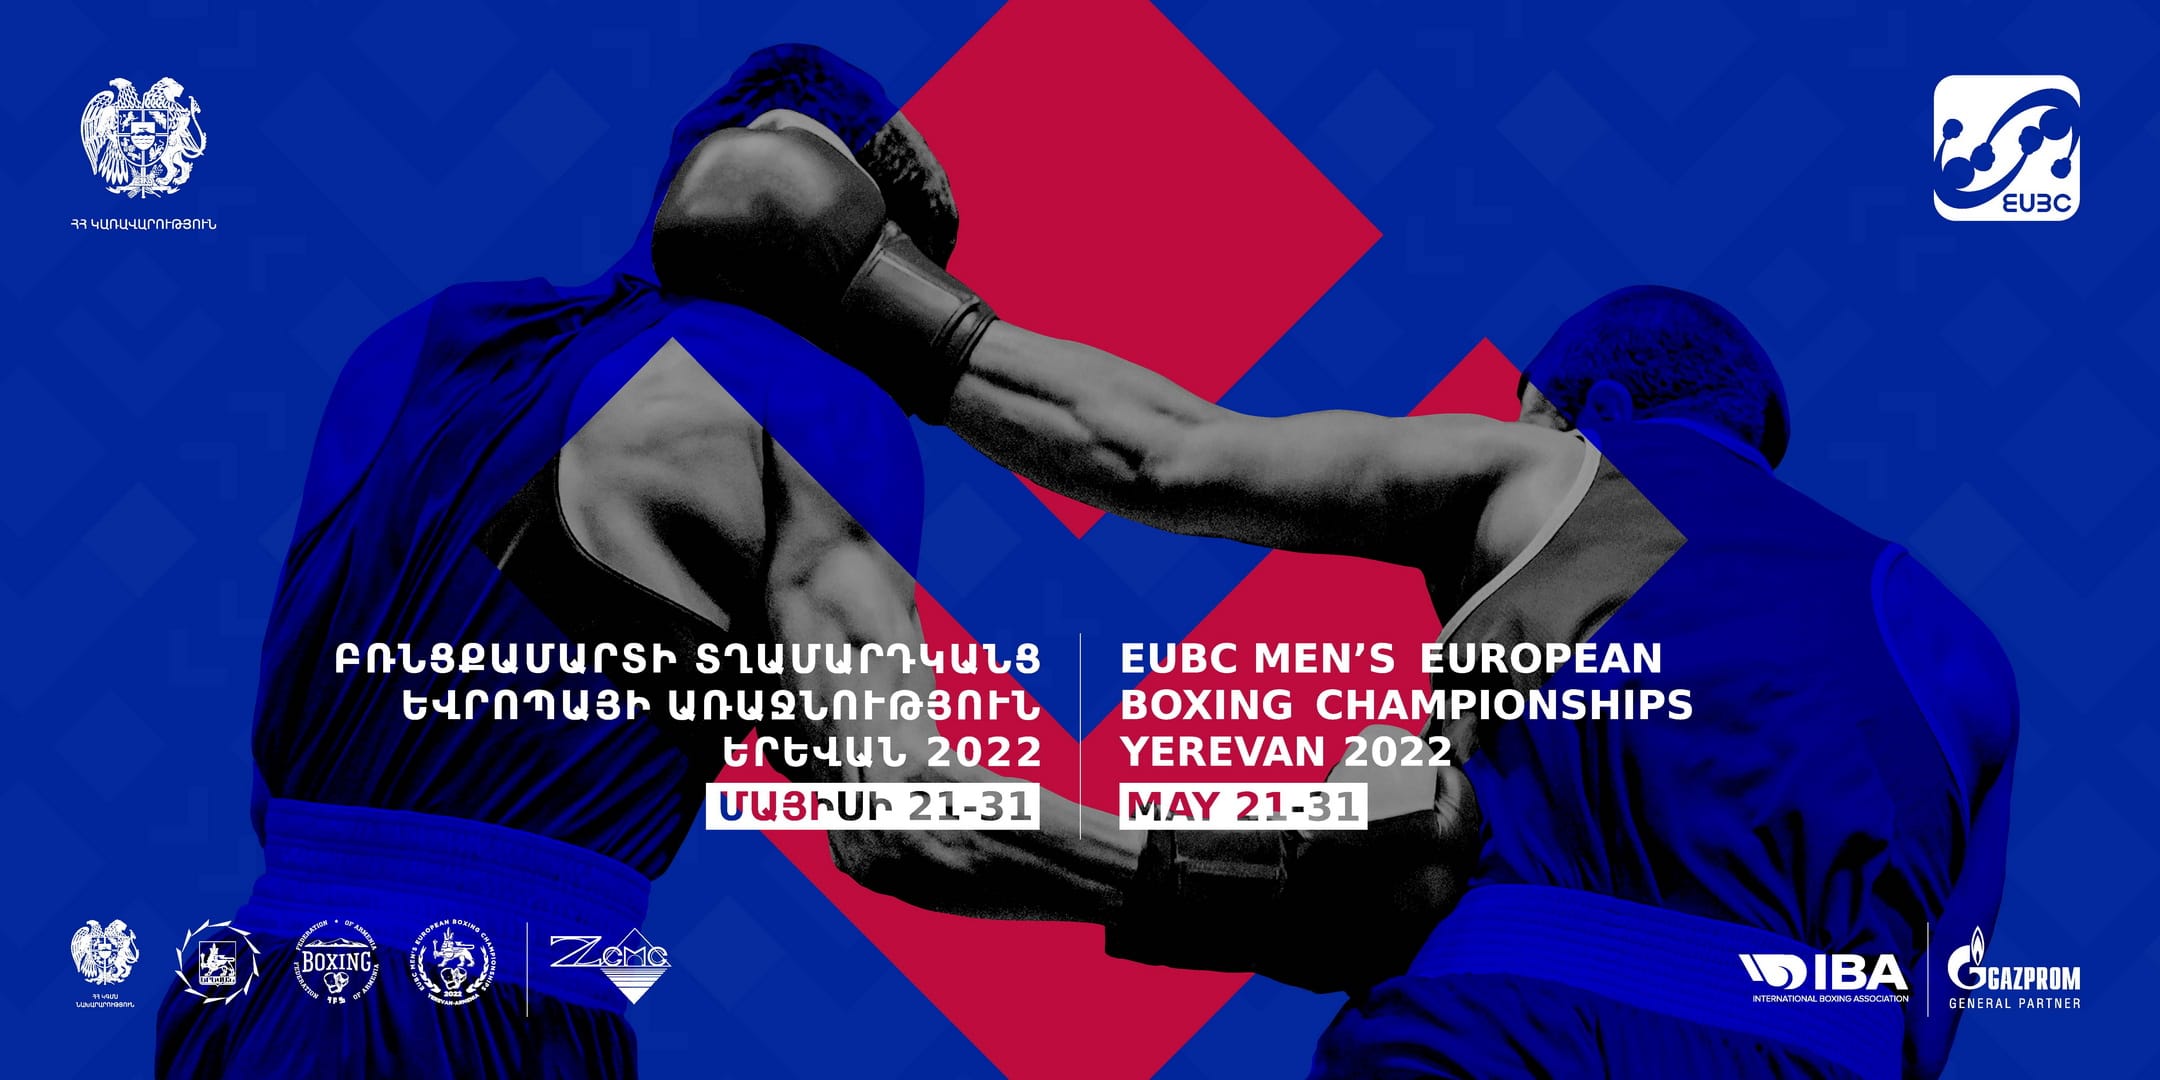 Thirty nine countries confirmed the participation at the EUBC European ...